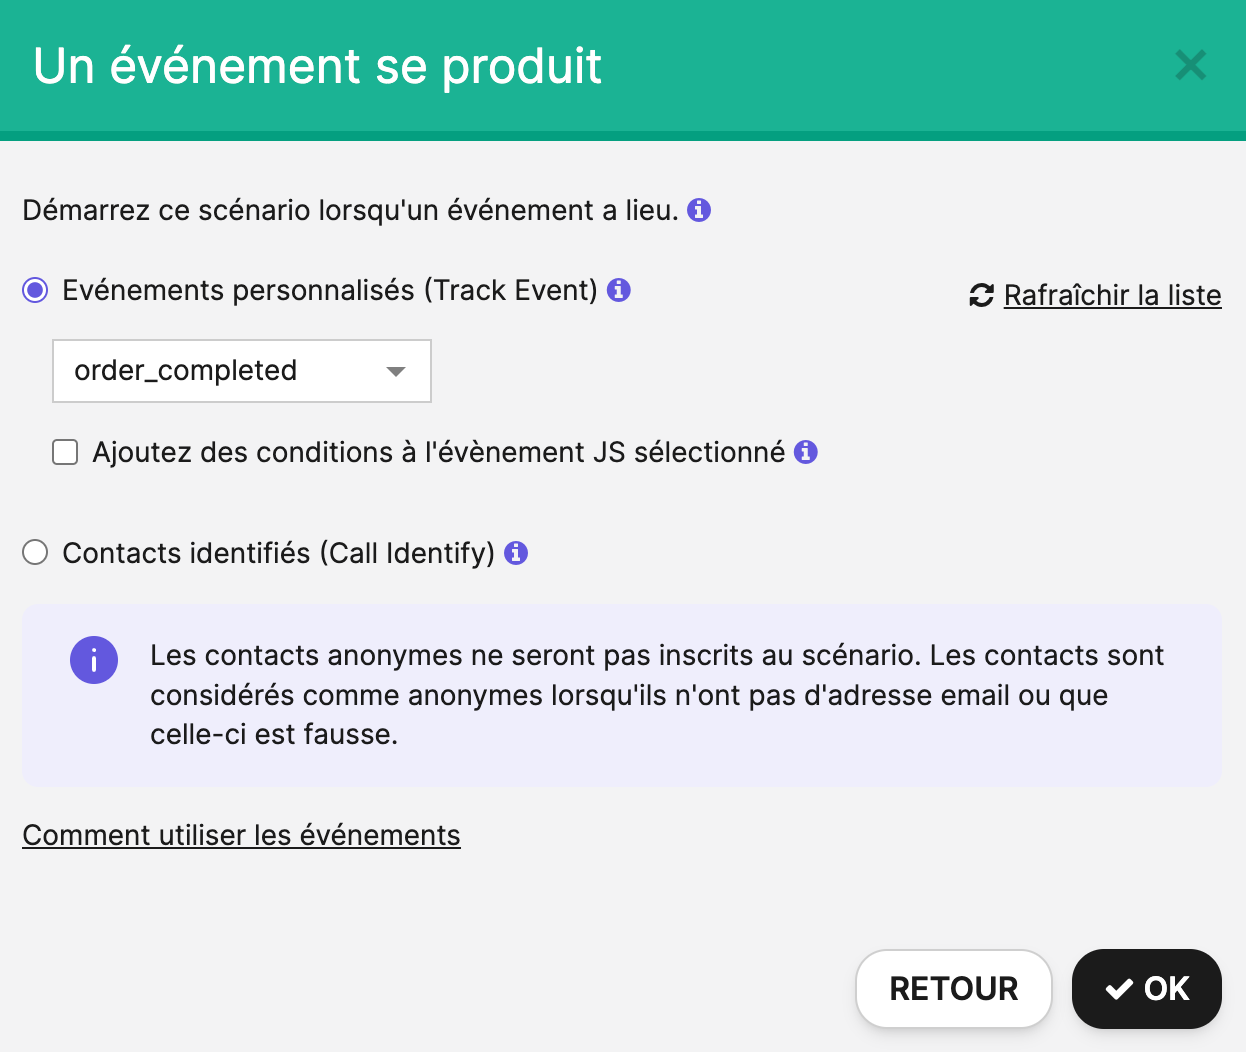 automations_event-order-completed_FR.png